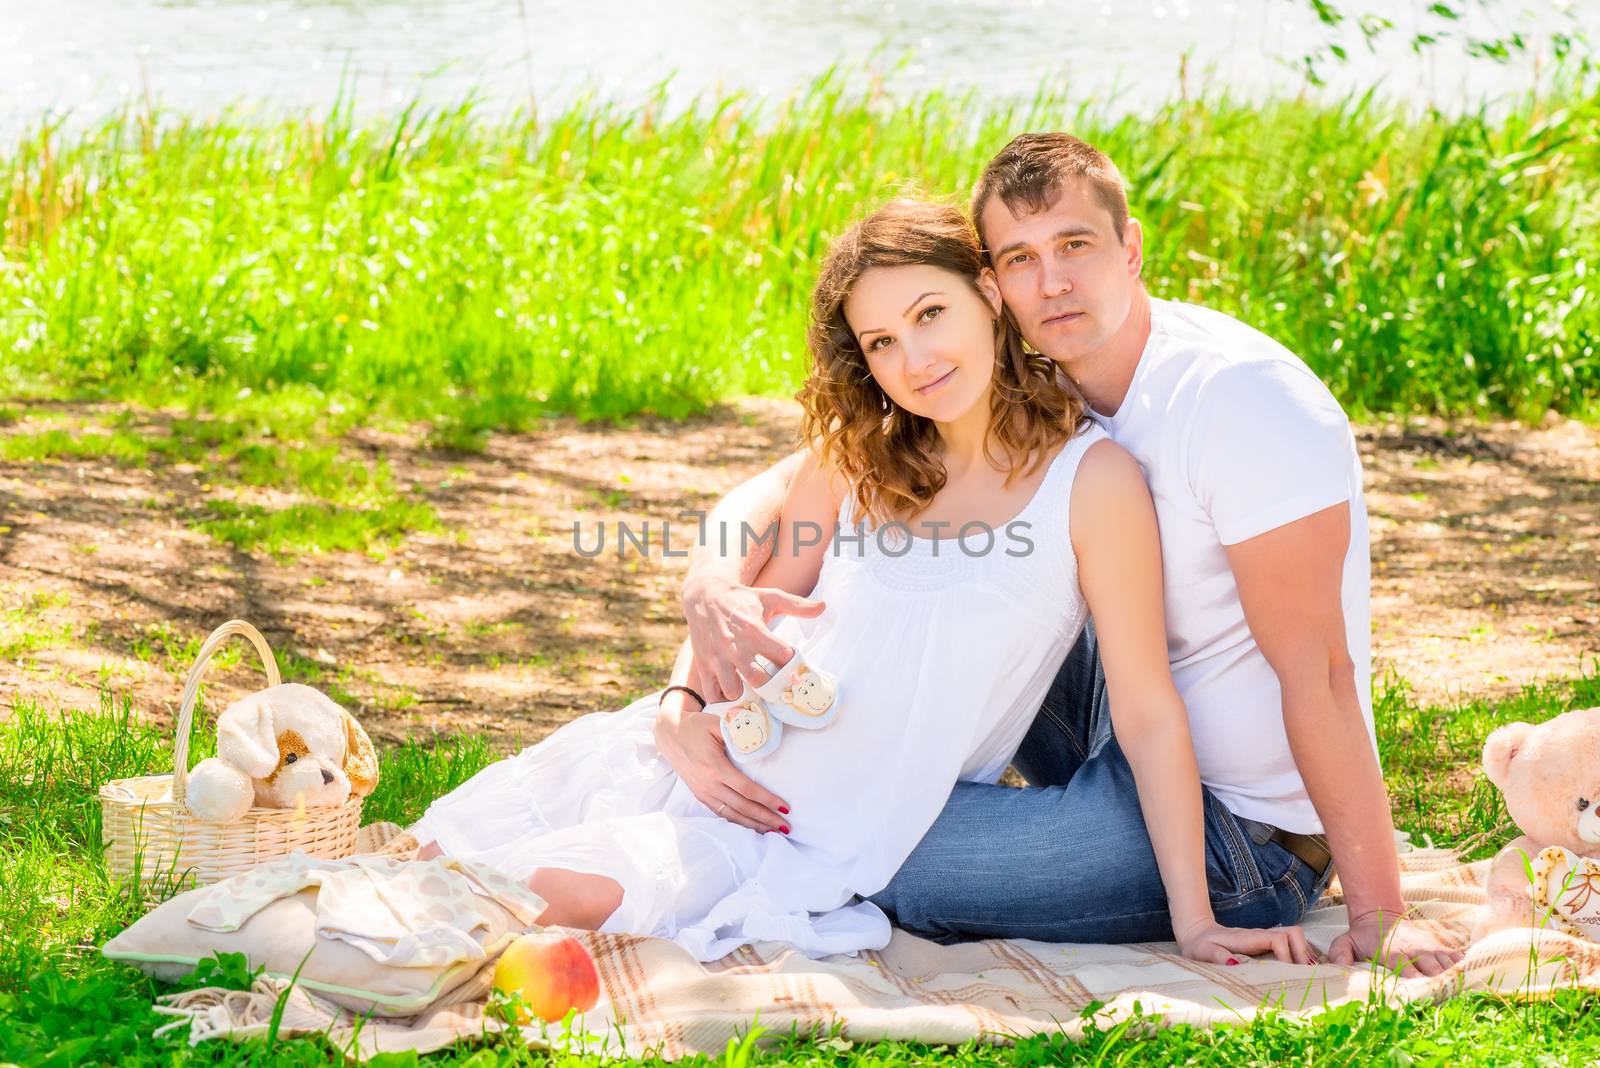 Picnic near the lake, young pregnant couple on a plaid